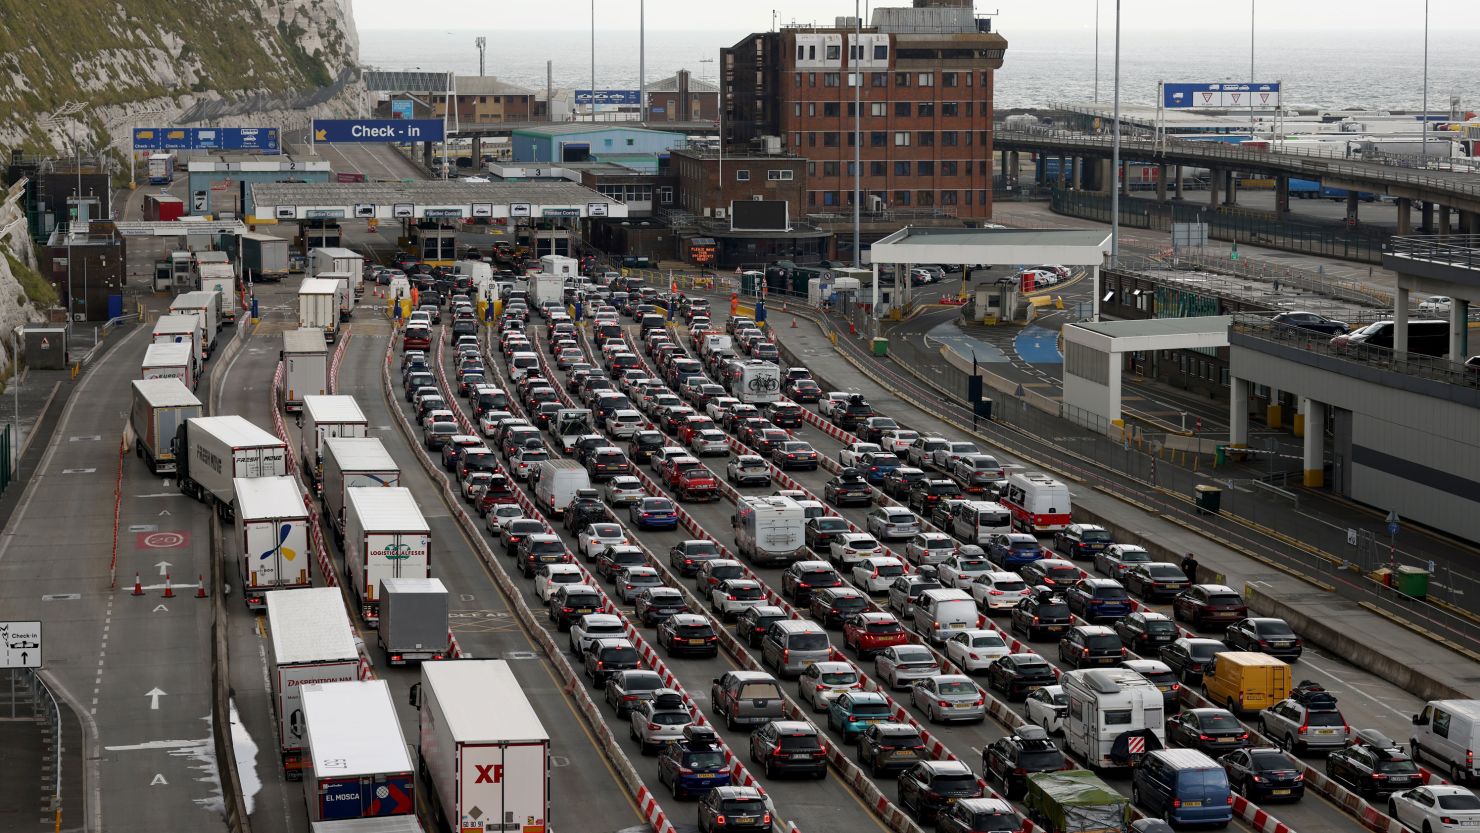 Queues of vehicles at the Port of Dover in England seen in July